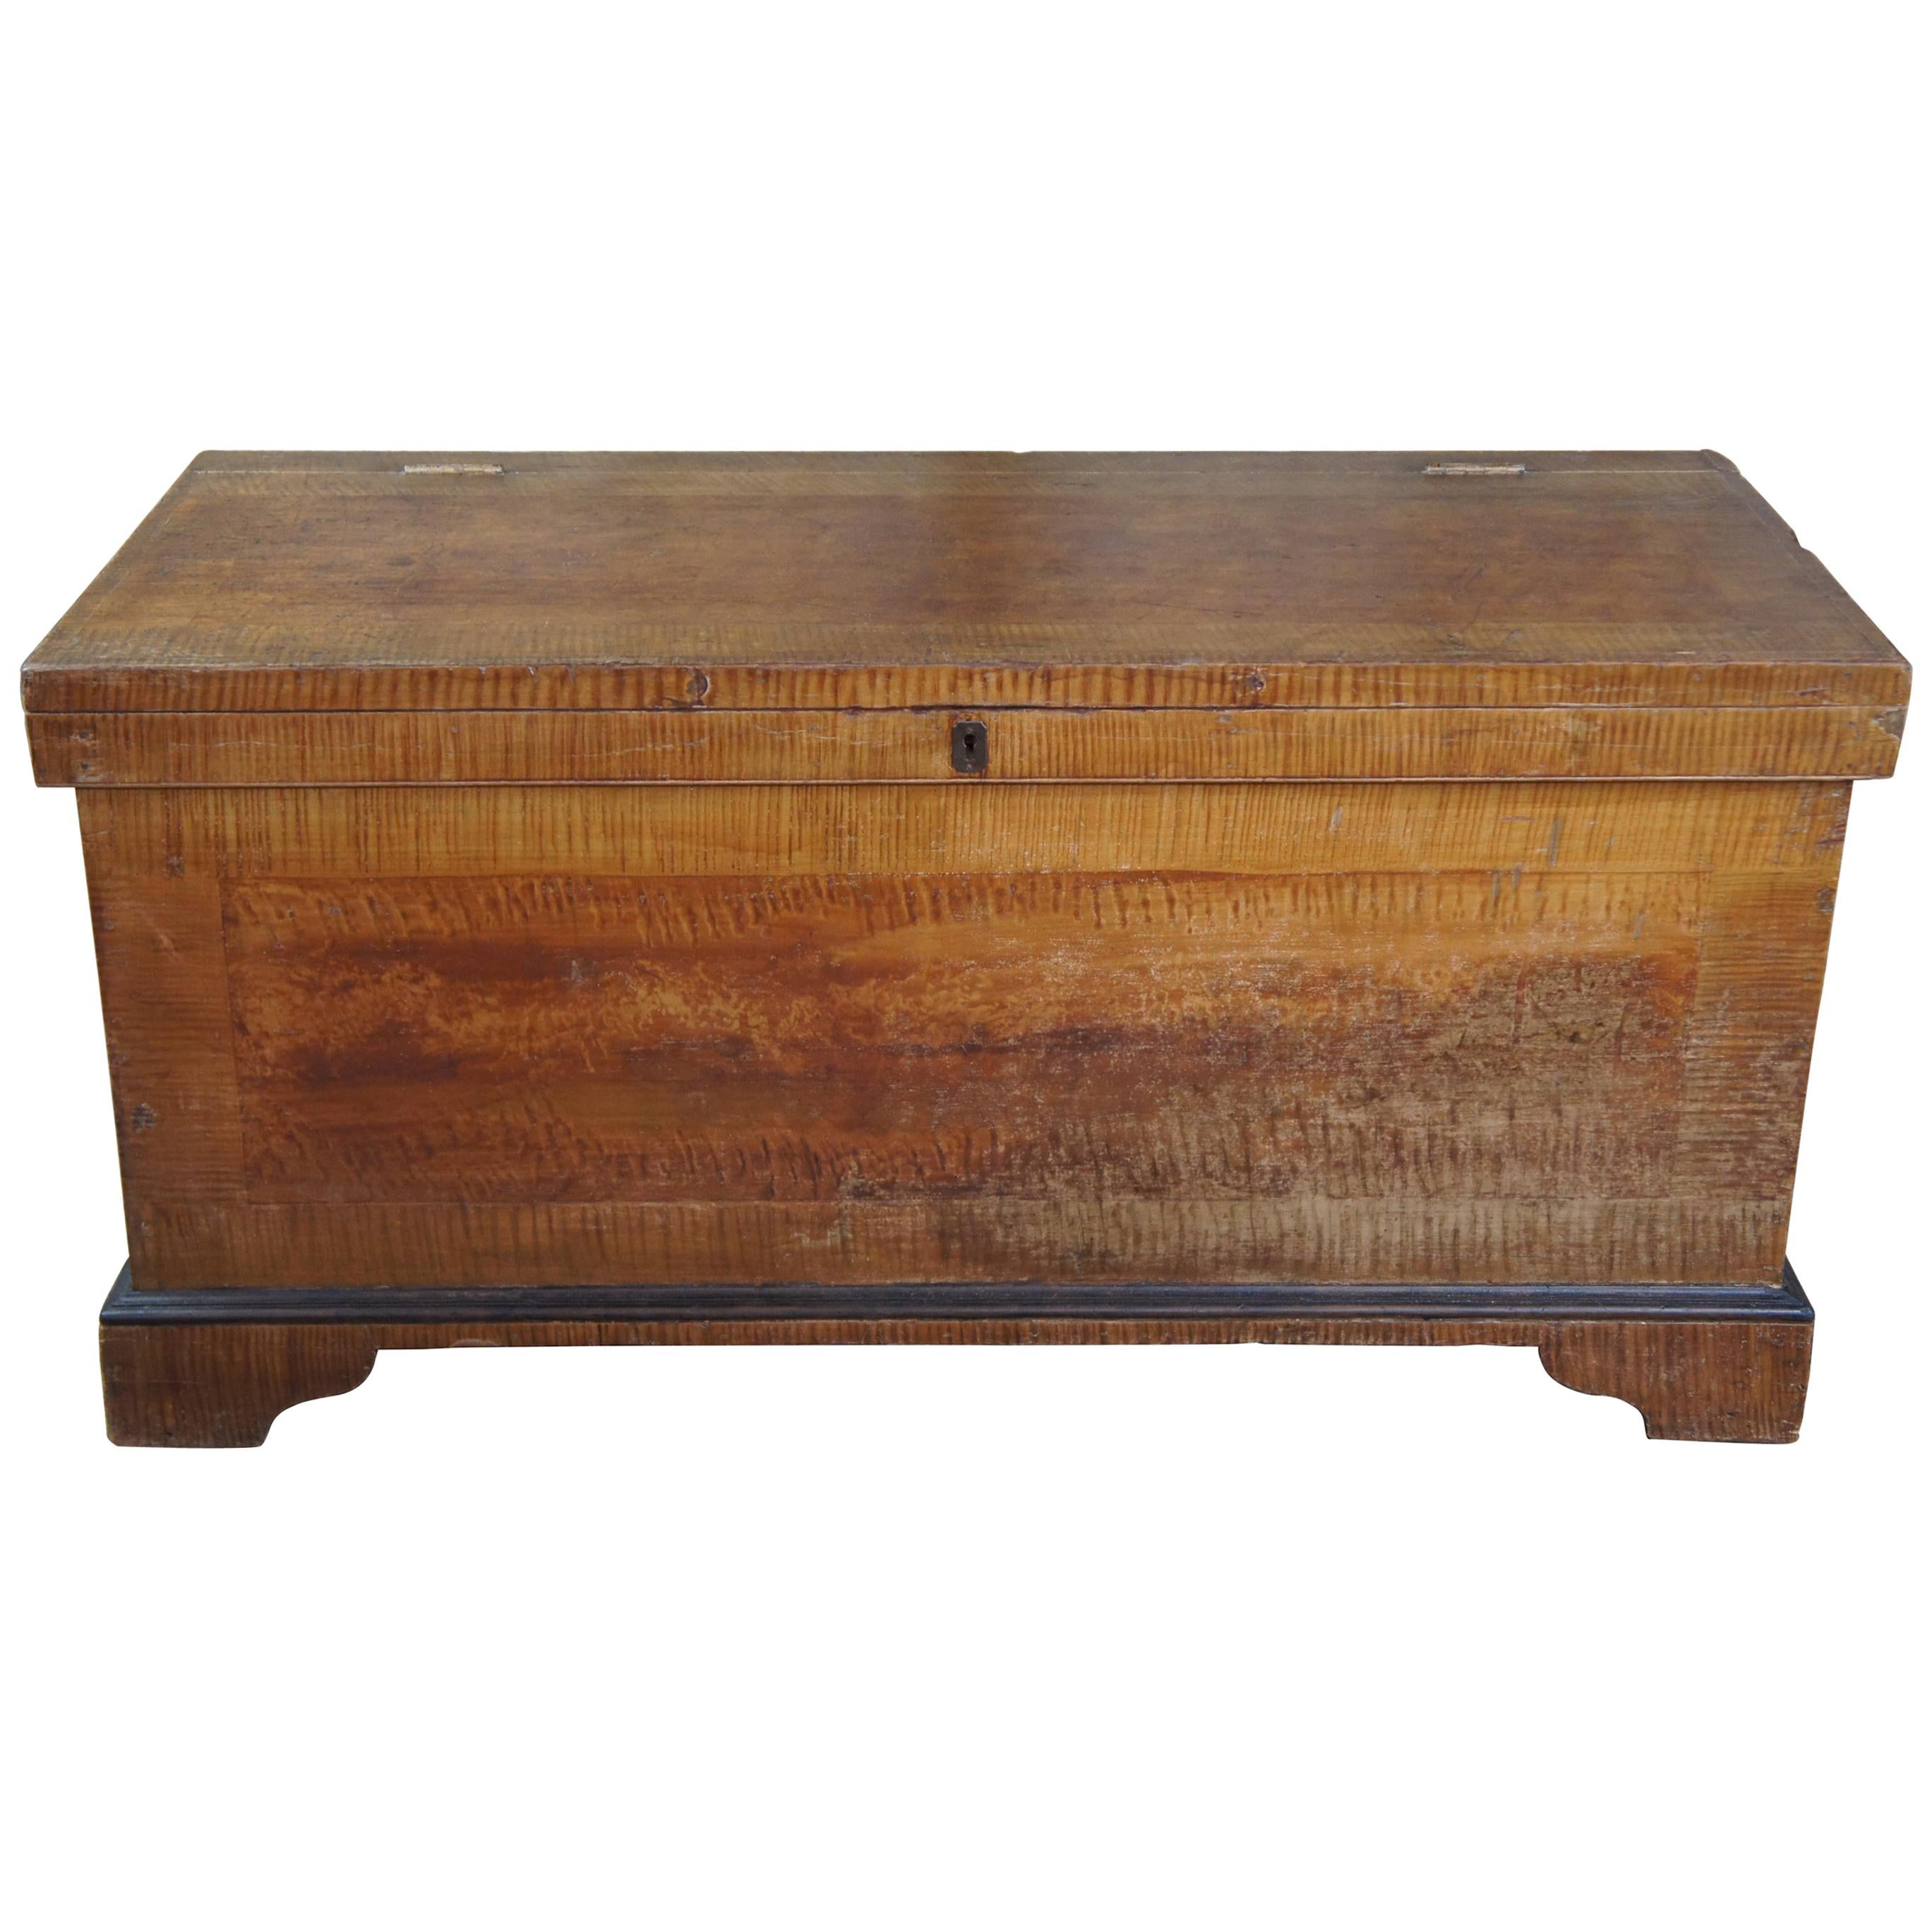 Early 19th Century Pennsylvania Pine Painted Grain Trunk or Blanket Chest